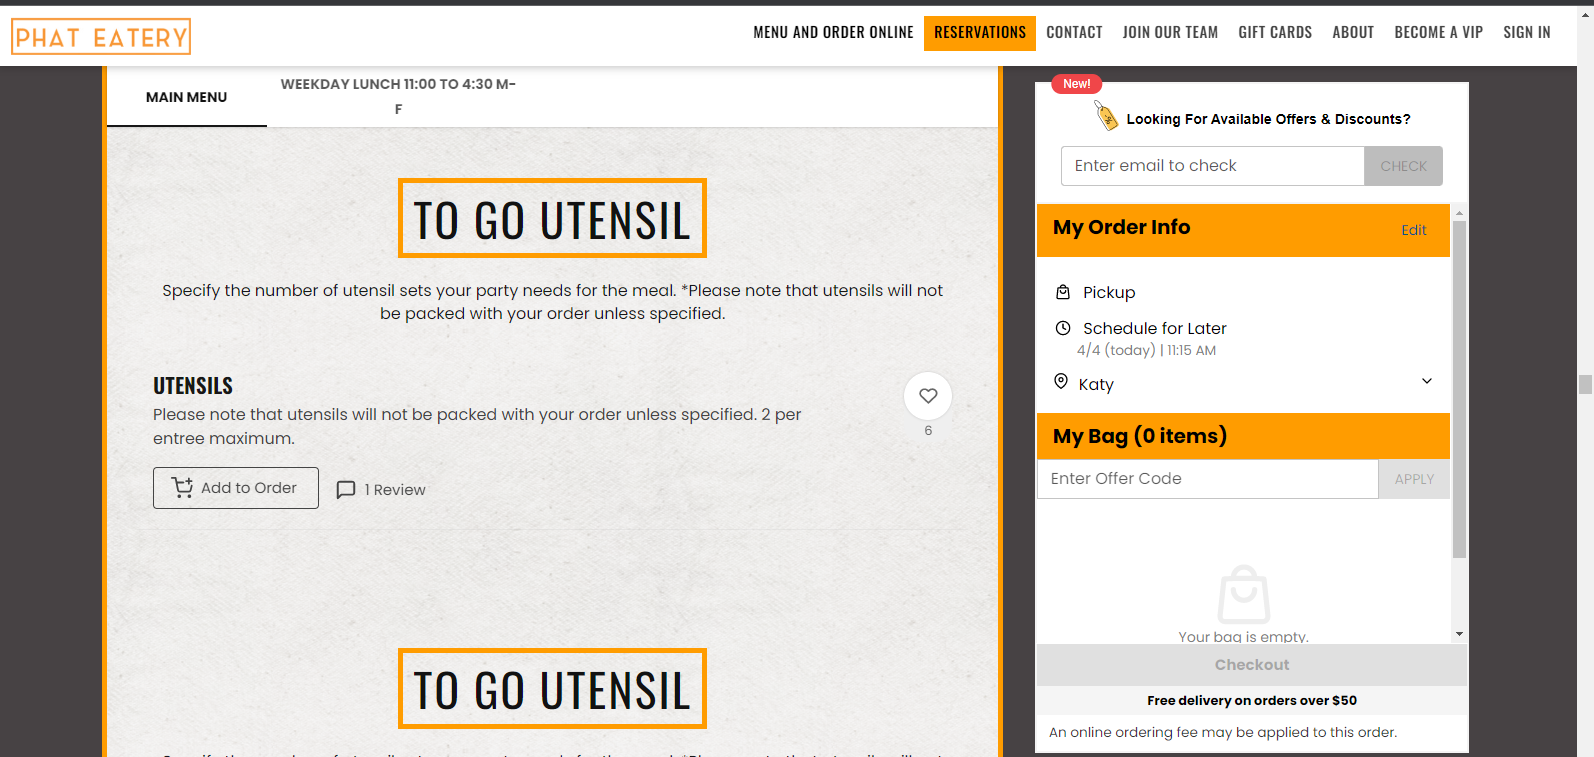 Screenshot from the Phat Eatery online order platform.